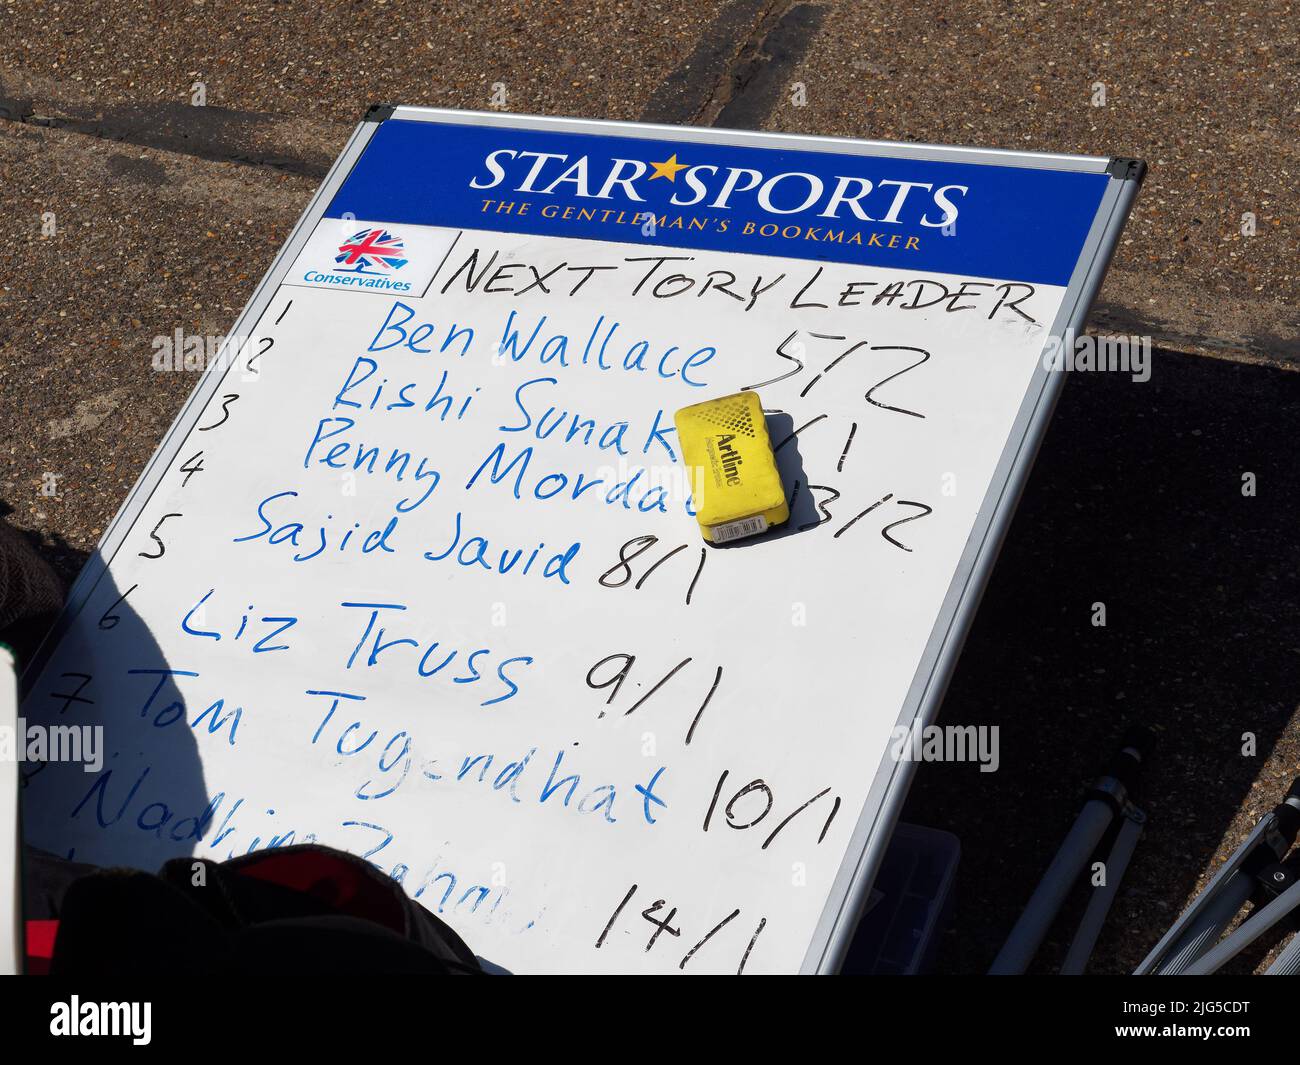 A board with betting odds on candidates for the next Conservative Leader following the resignation of Prime Minister Boris Johnson on 7 July 2022 Stock Photo